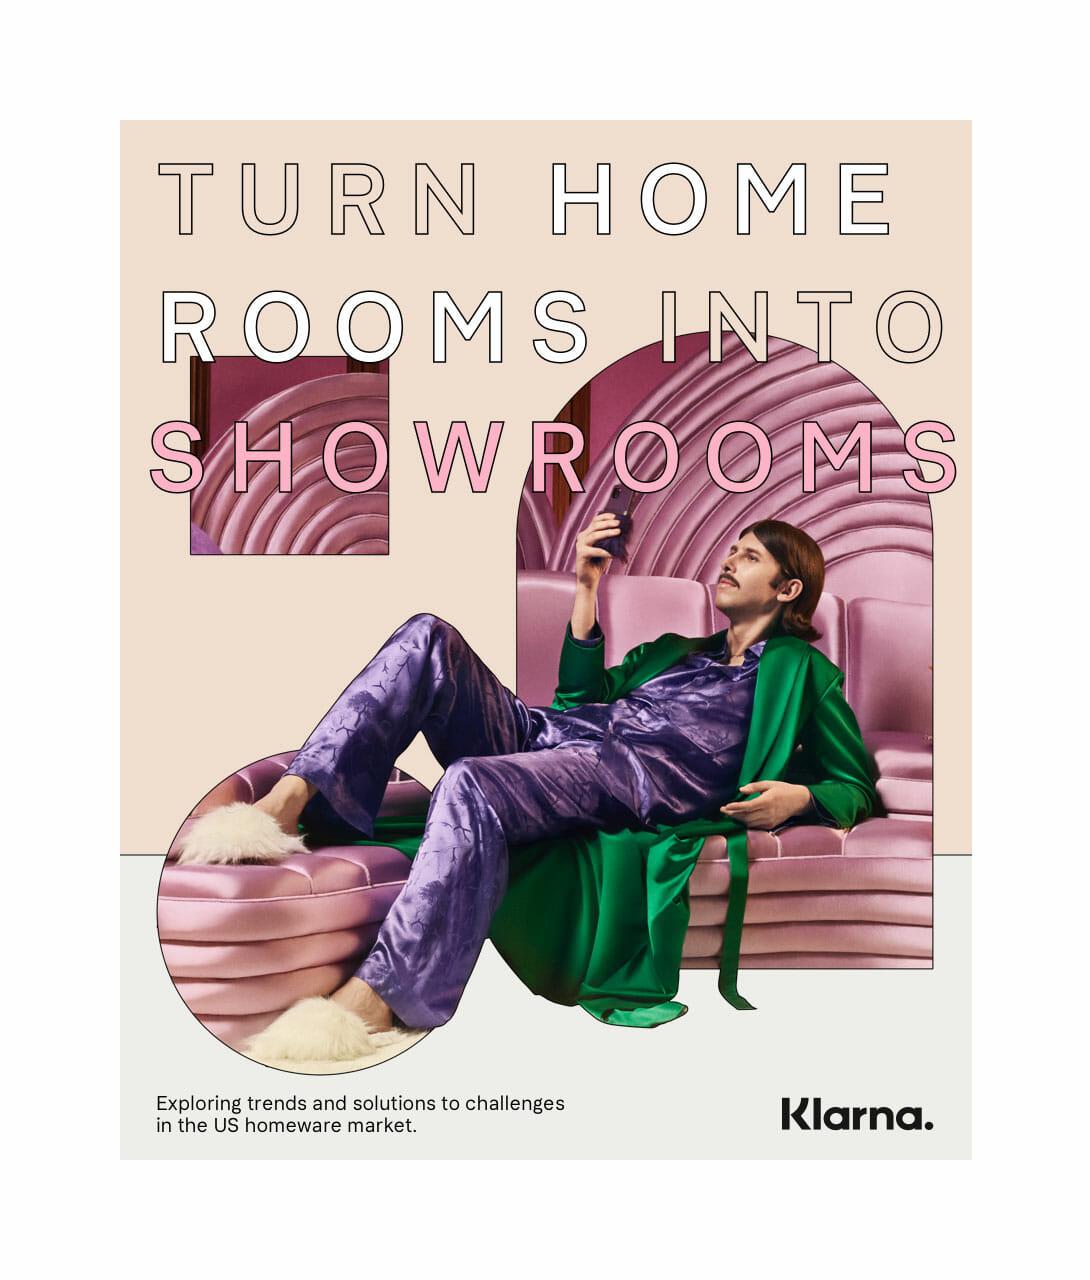 Turn home rooms into showrooms report image